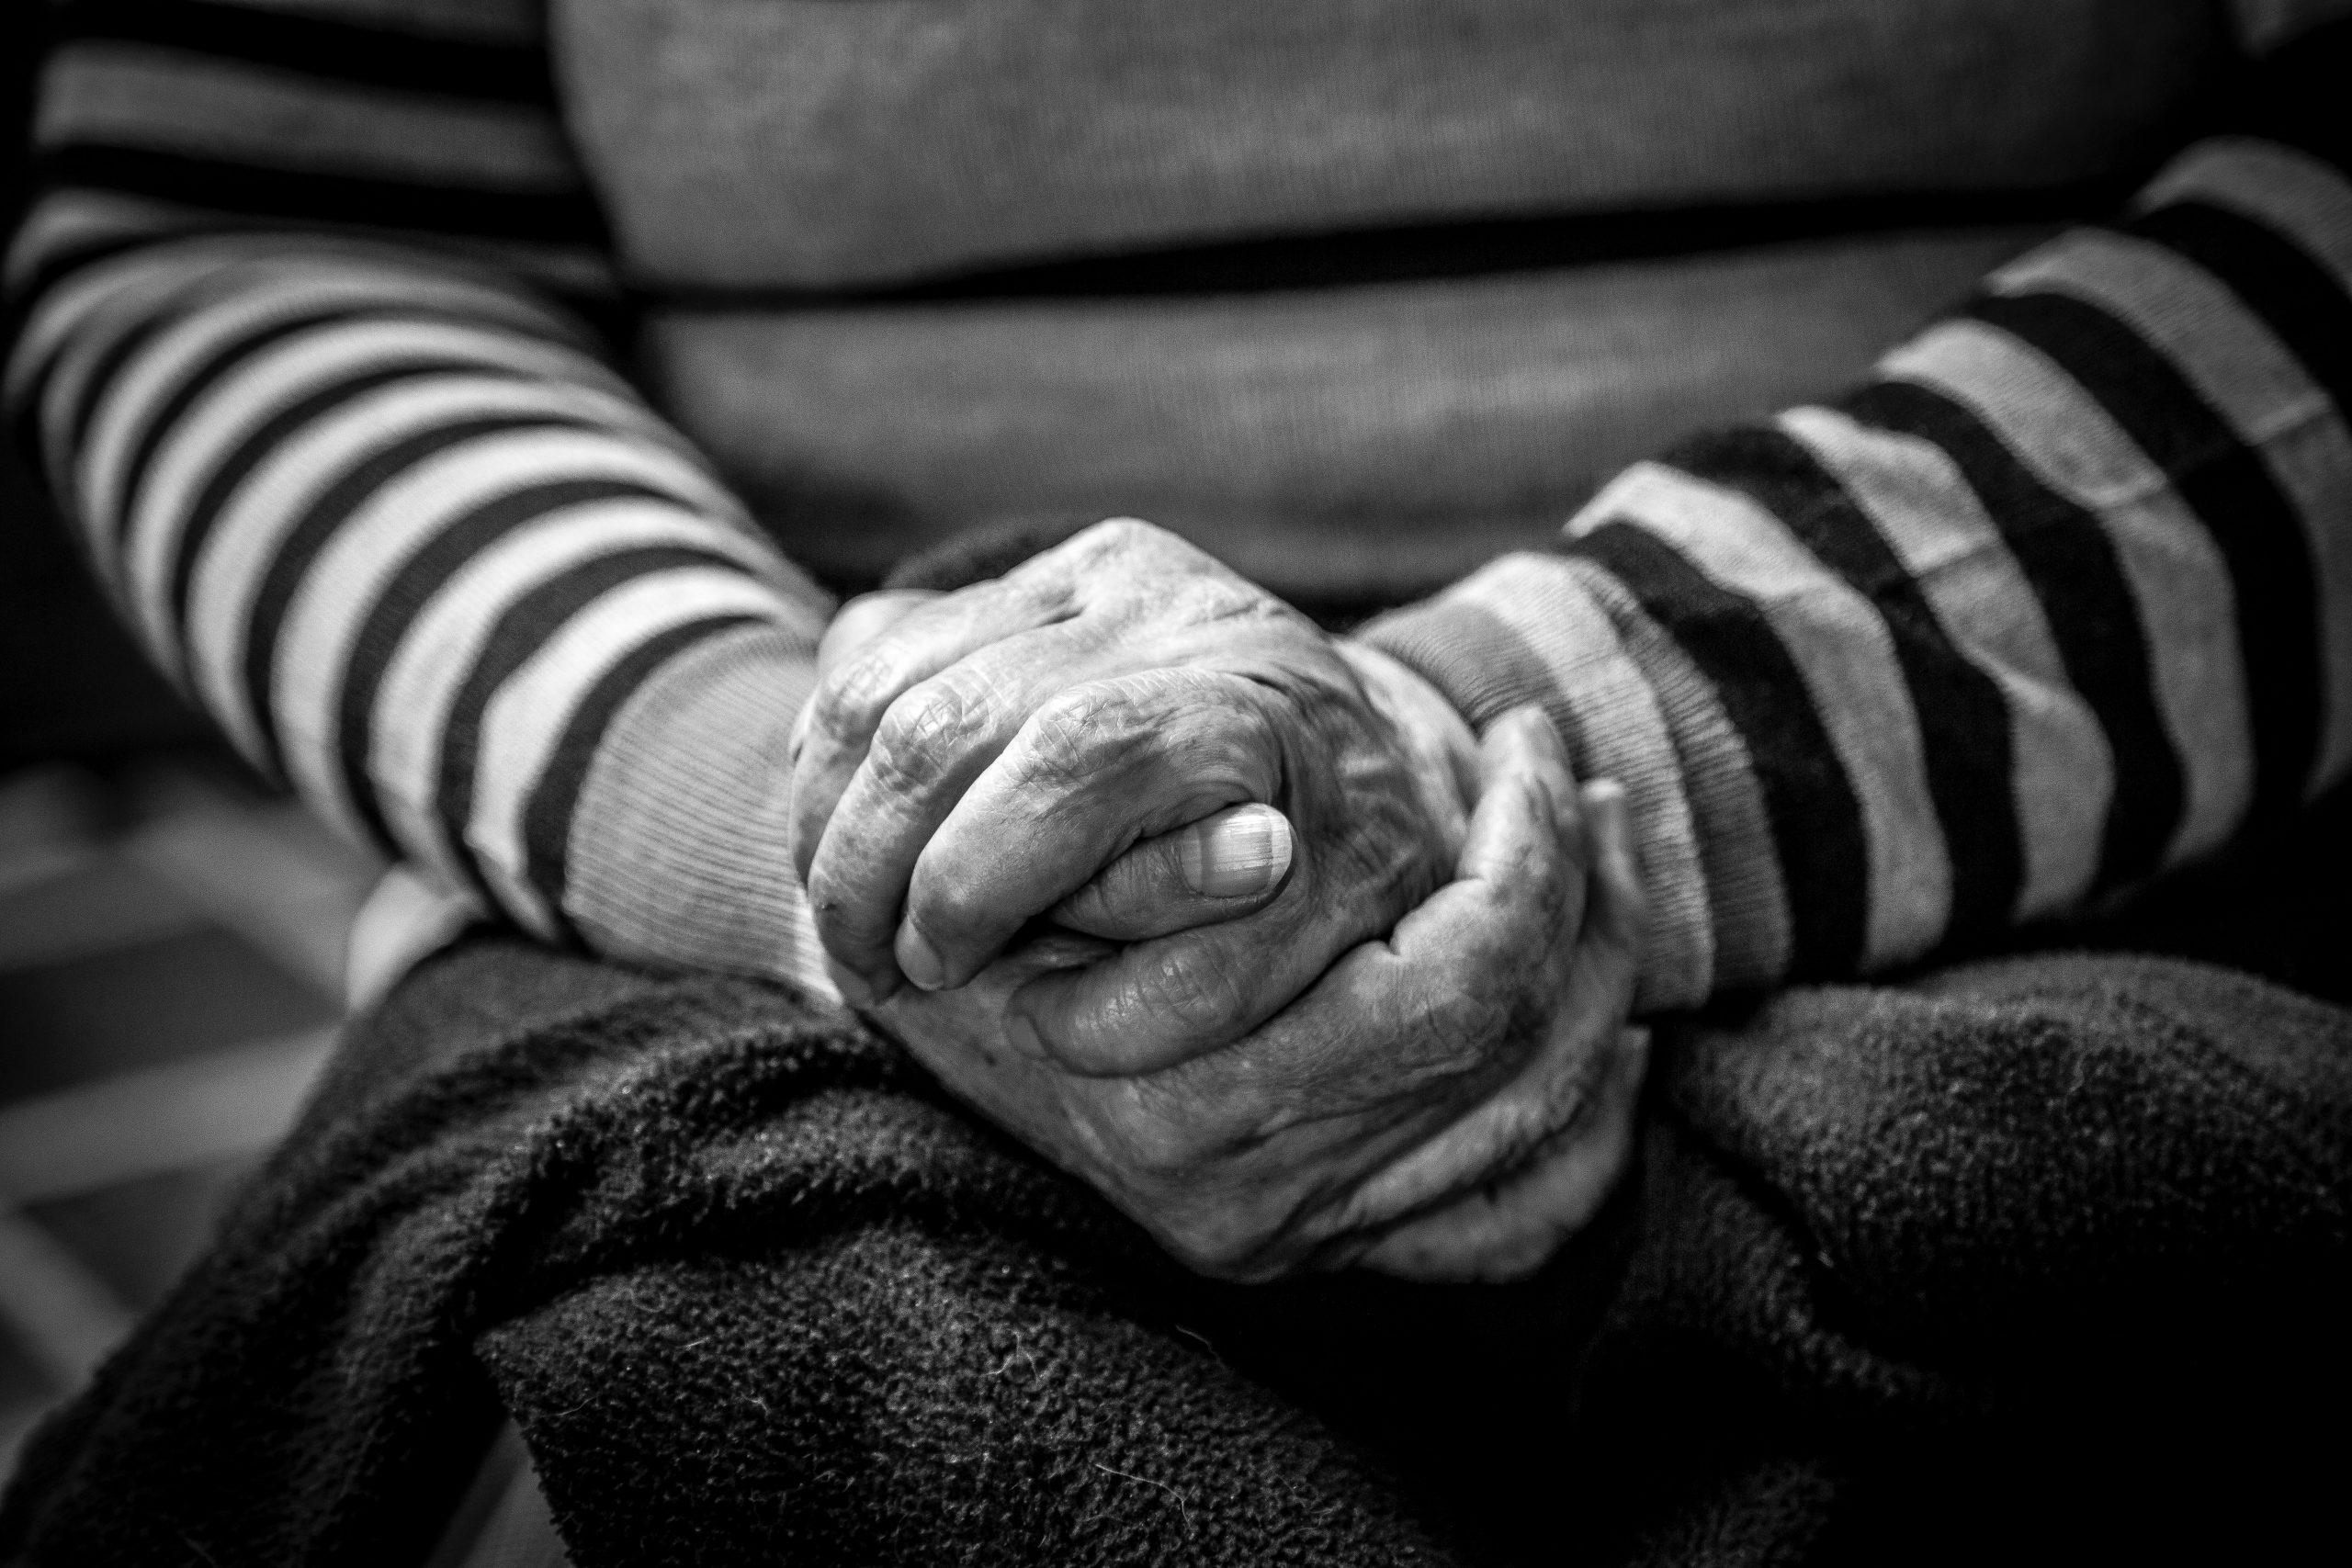 Aged Care Commission now taking a closer look at compulsory reports